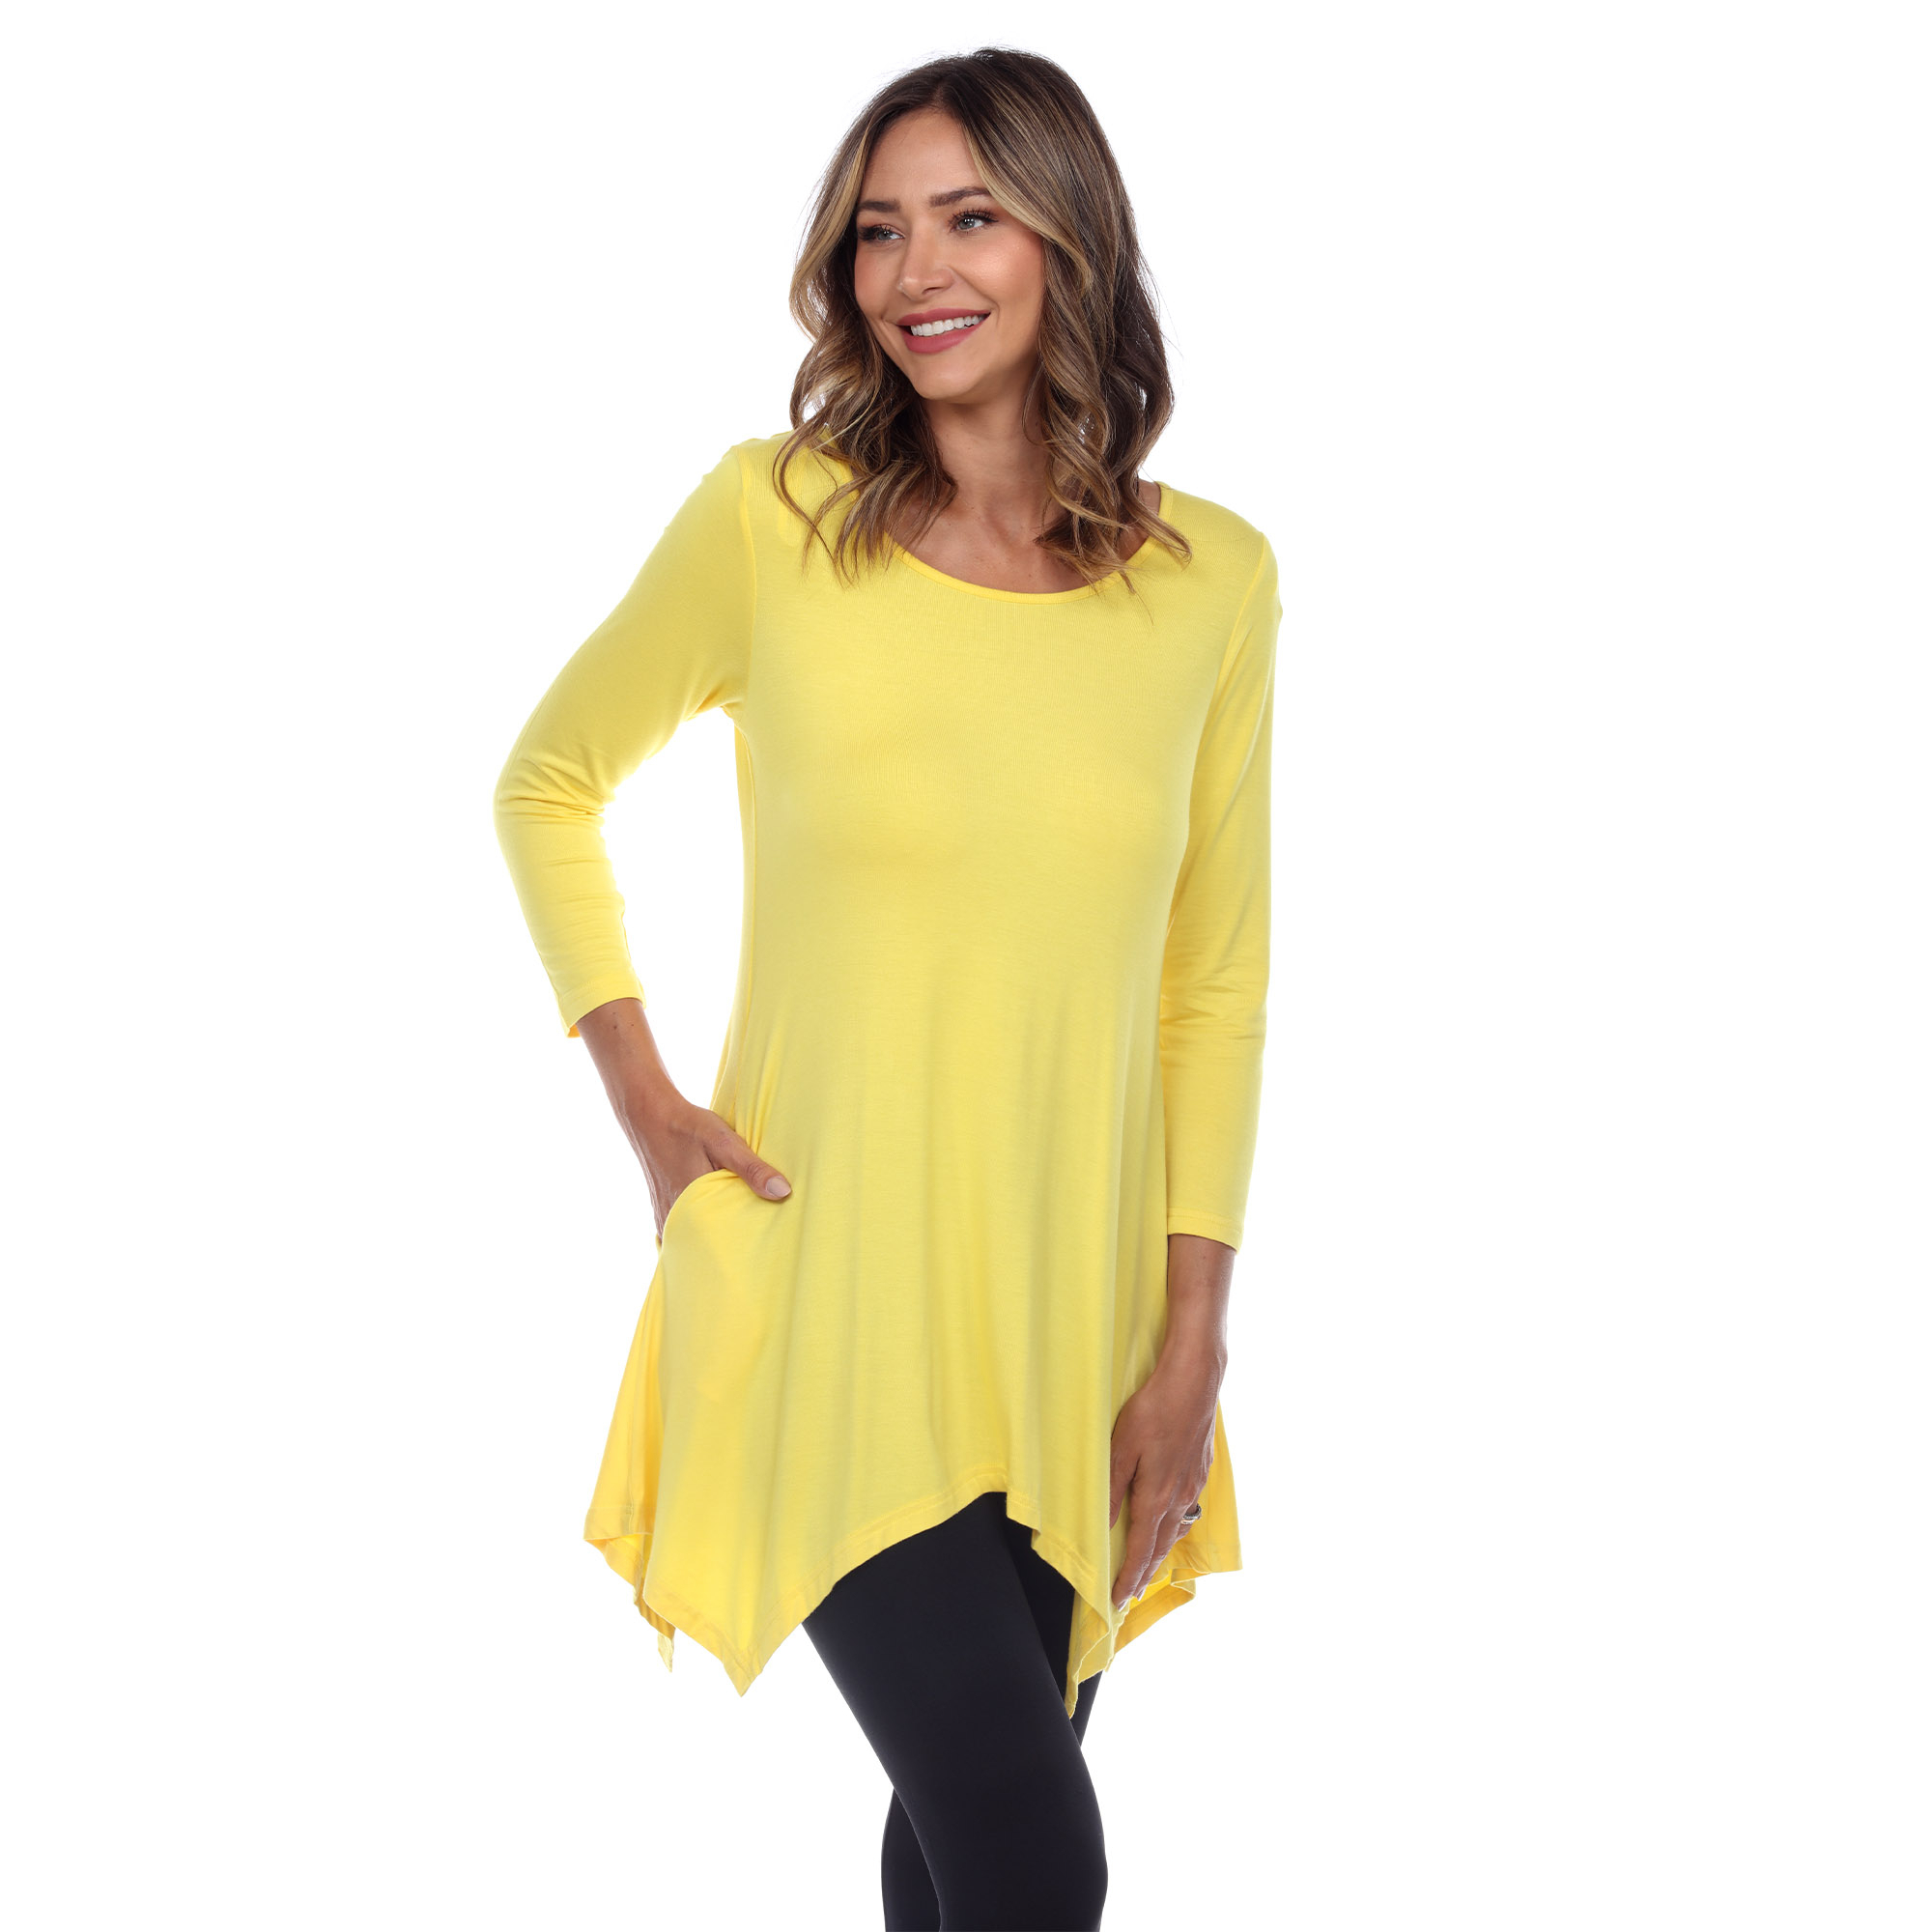 White Mark Women's Quarter Sleeve Tunic Top With Pockets - Yellow, 1X